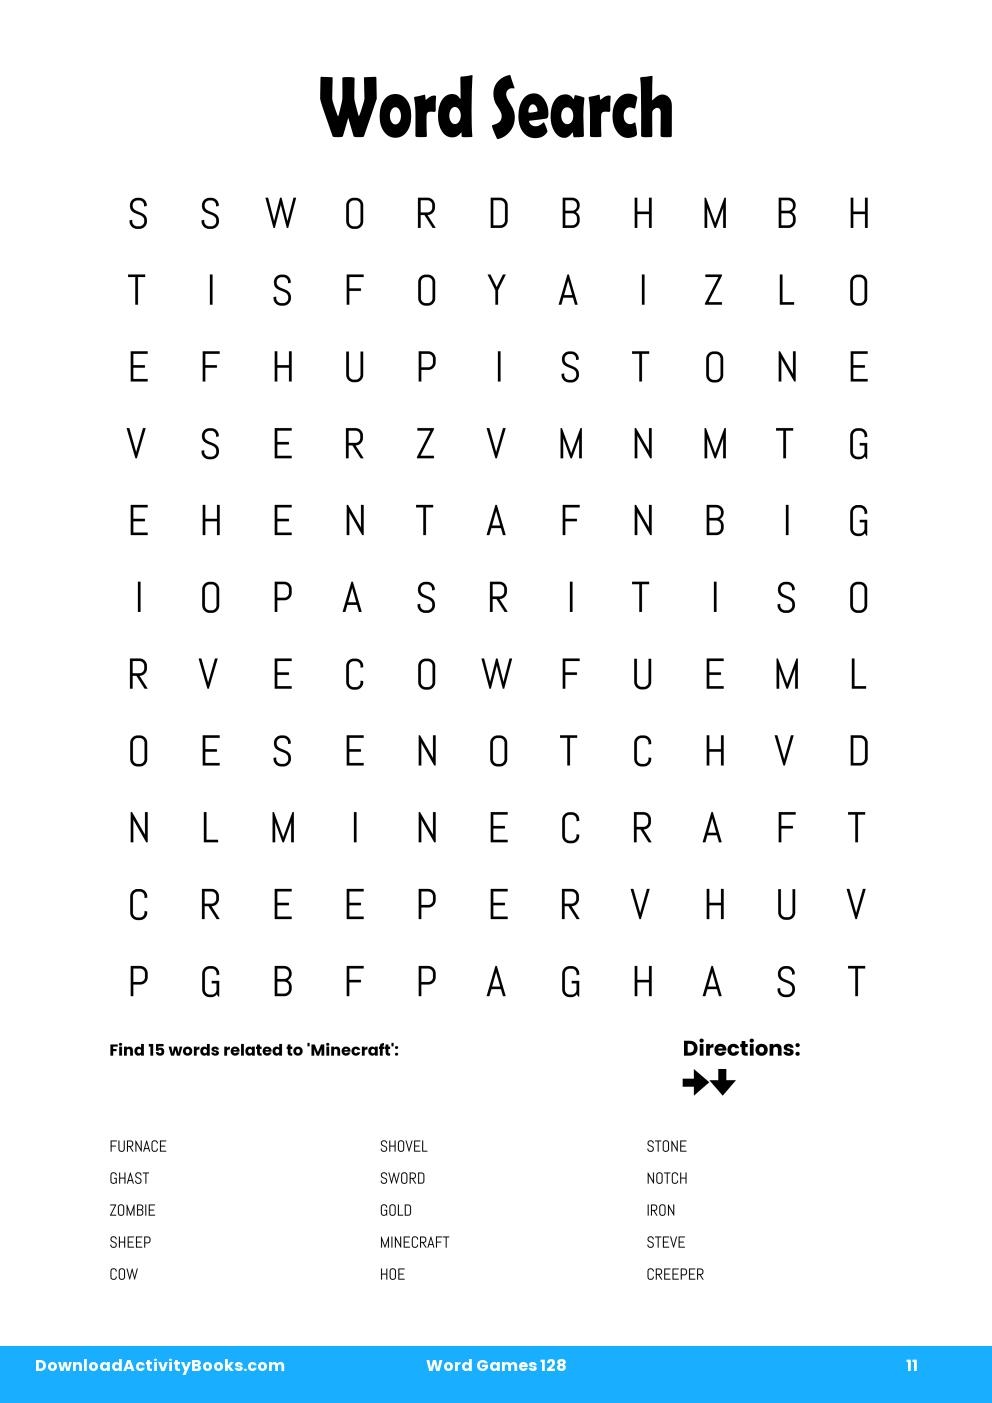 Word Search in Word Games 128